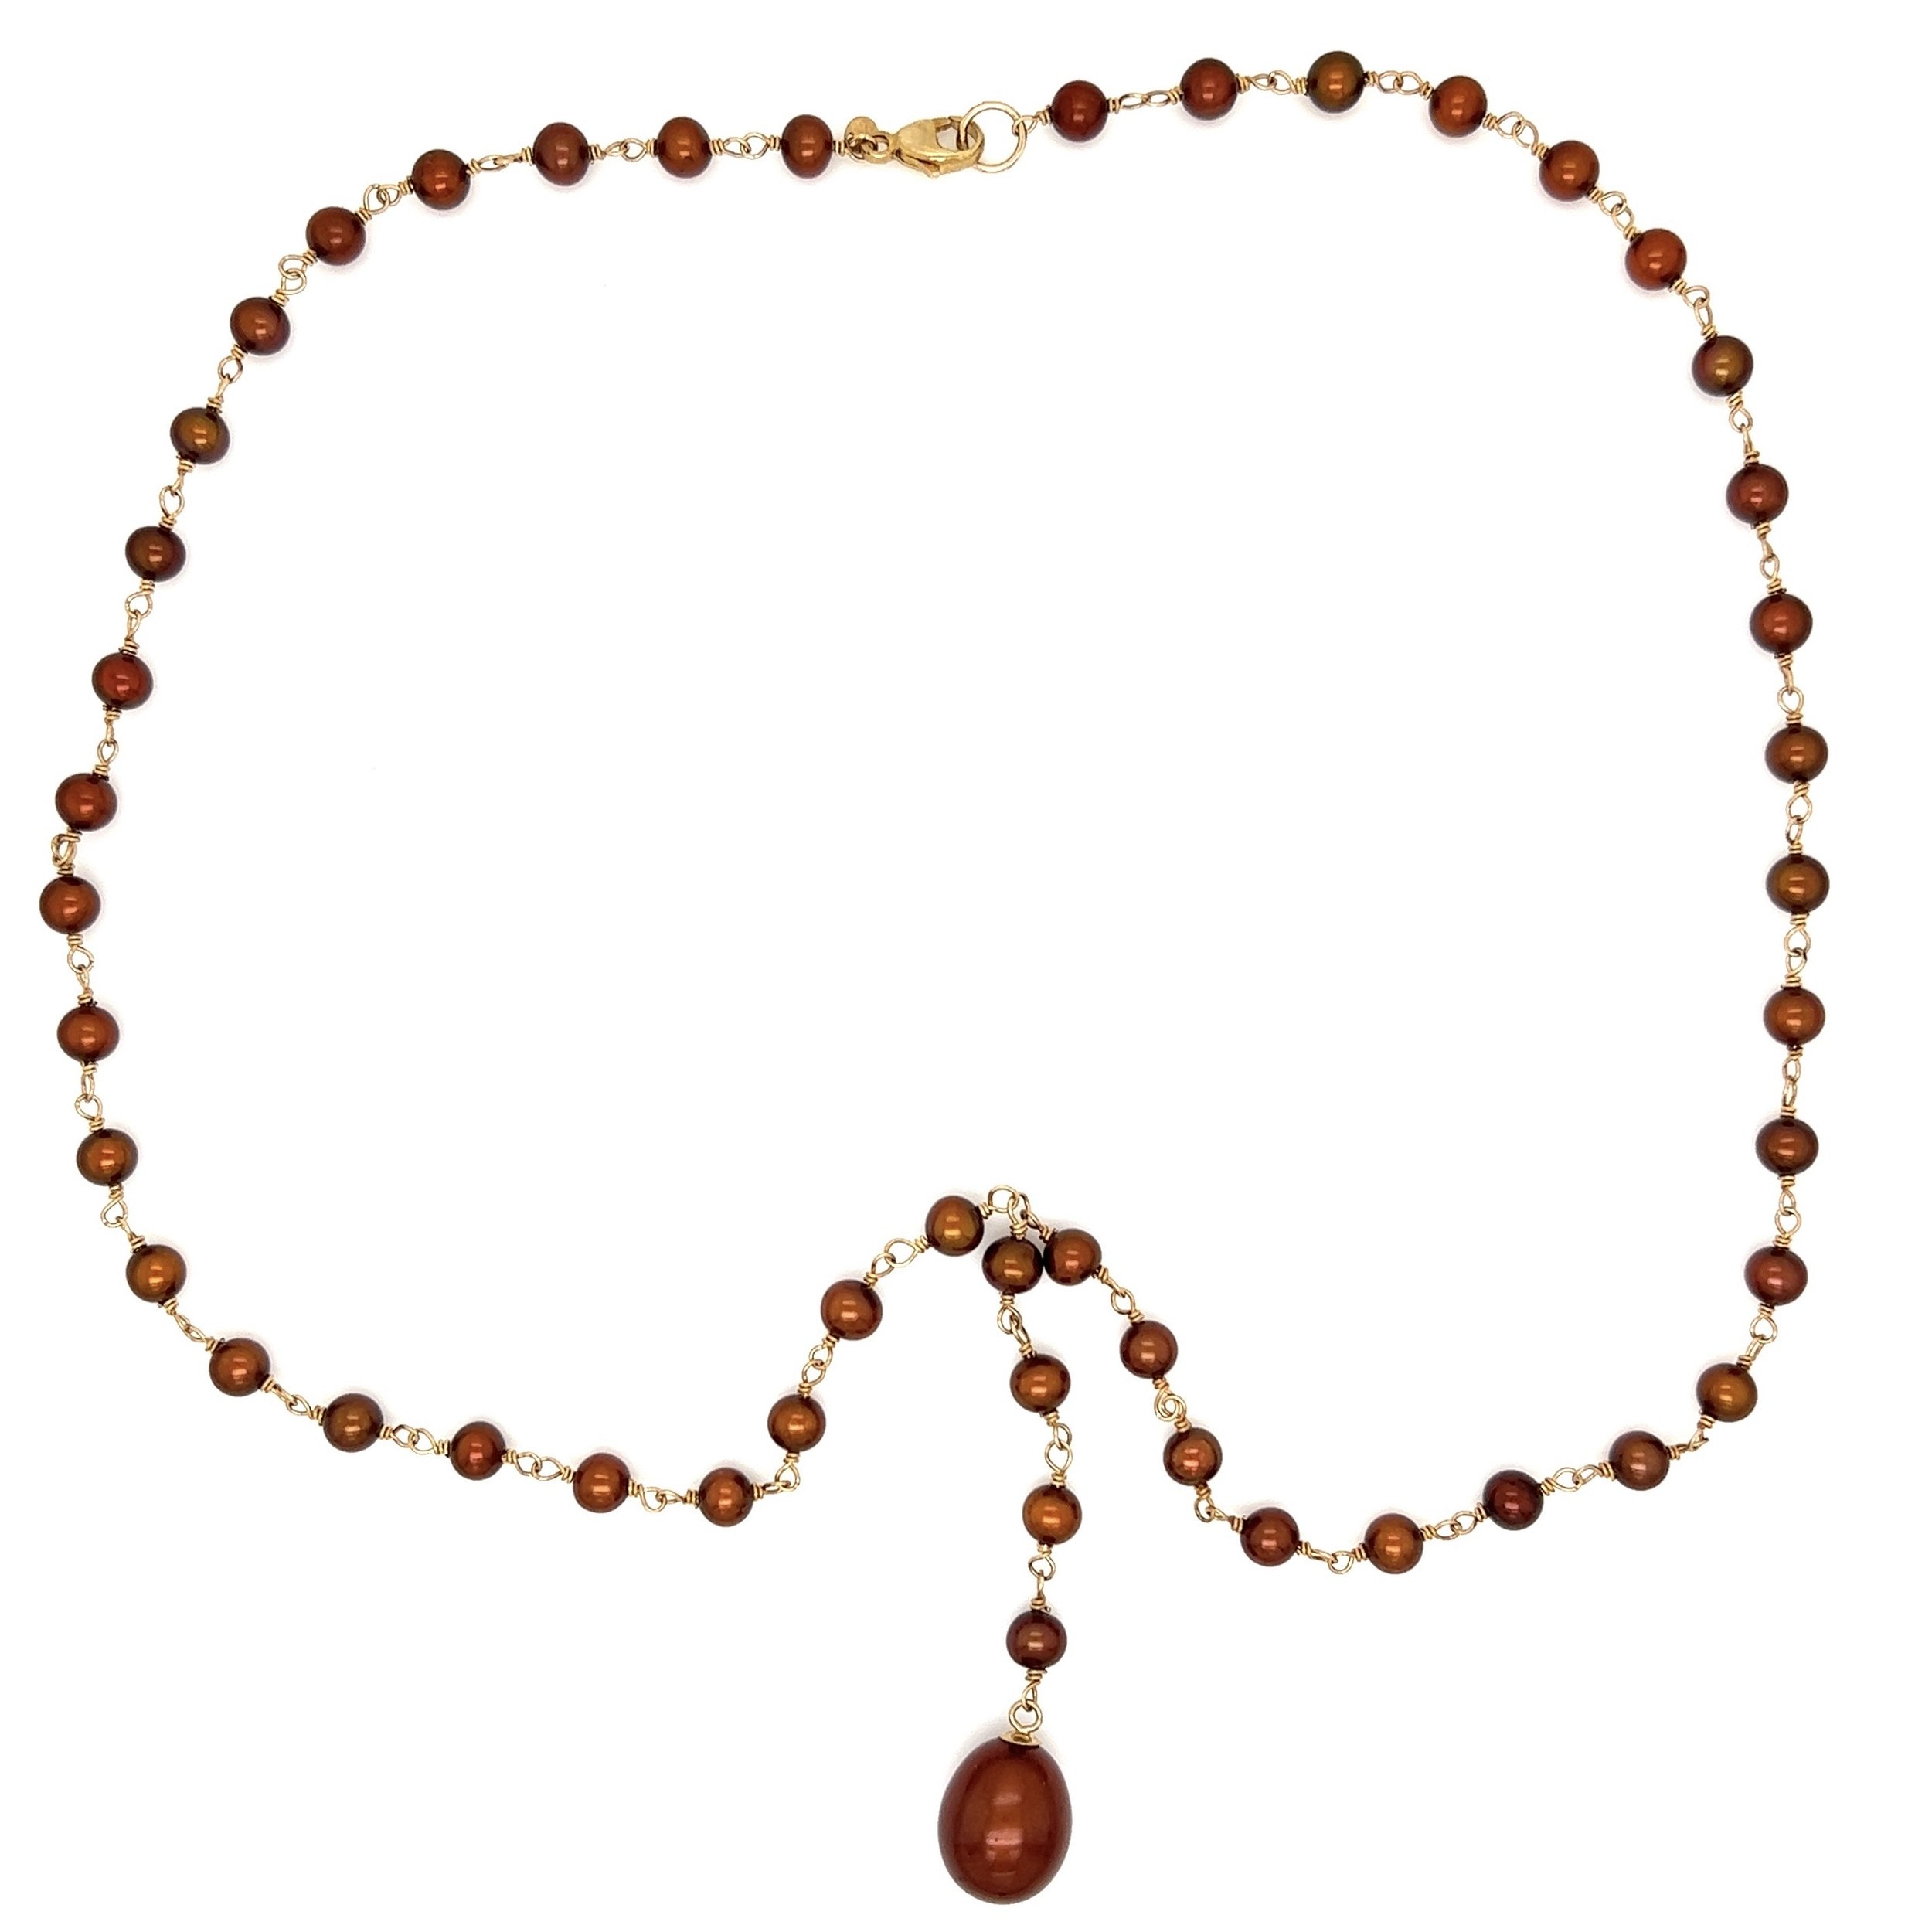 14K YG Chocolate (Dyed) 9mm & 3mm Freshwater Pearl Necklace 8.9g, 16"